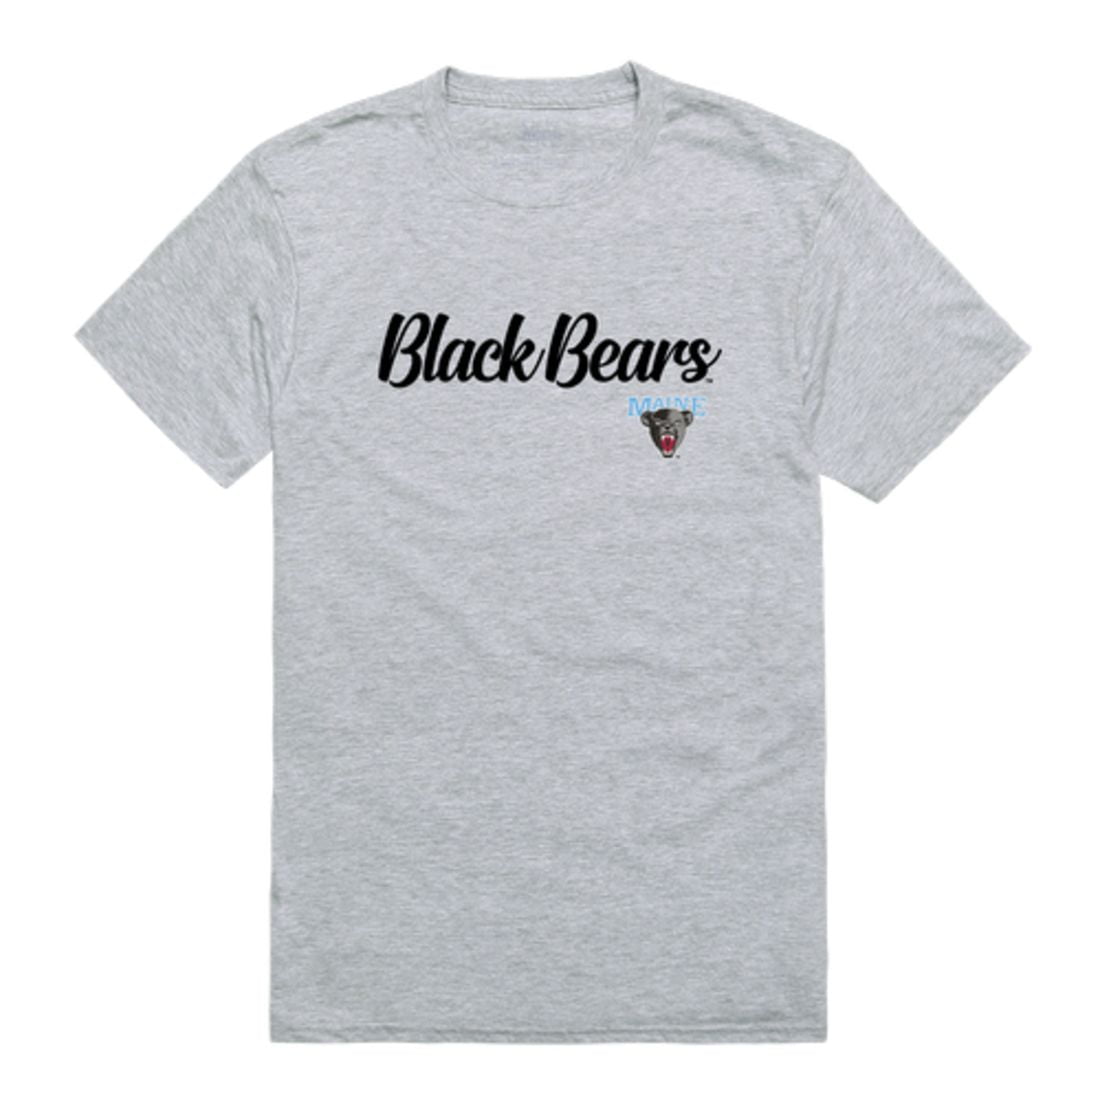 MAINE BLACK BEARS ADULT GREY EMBROIDERED SHORT SLEEVE T-SHIRT NEW 